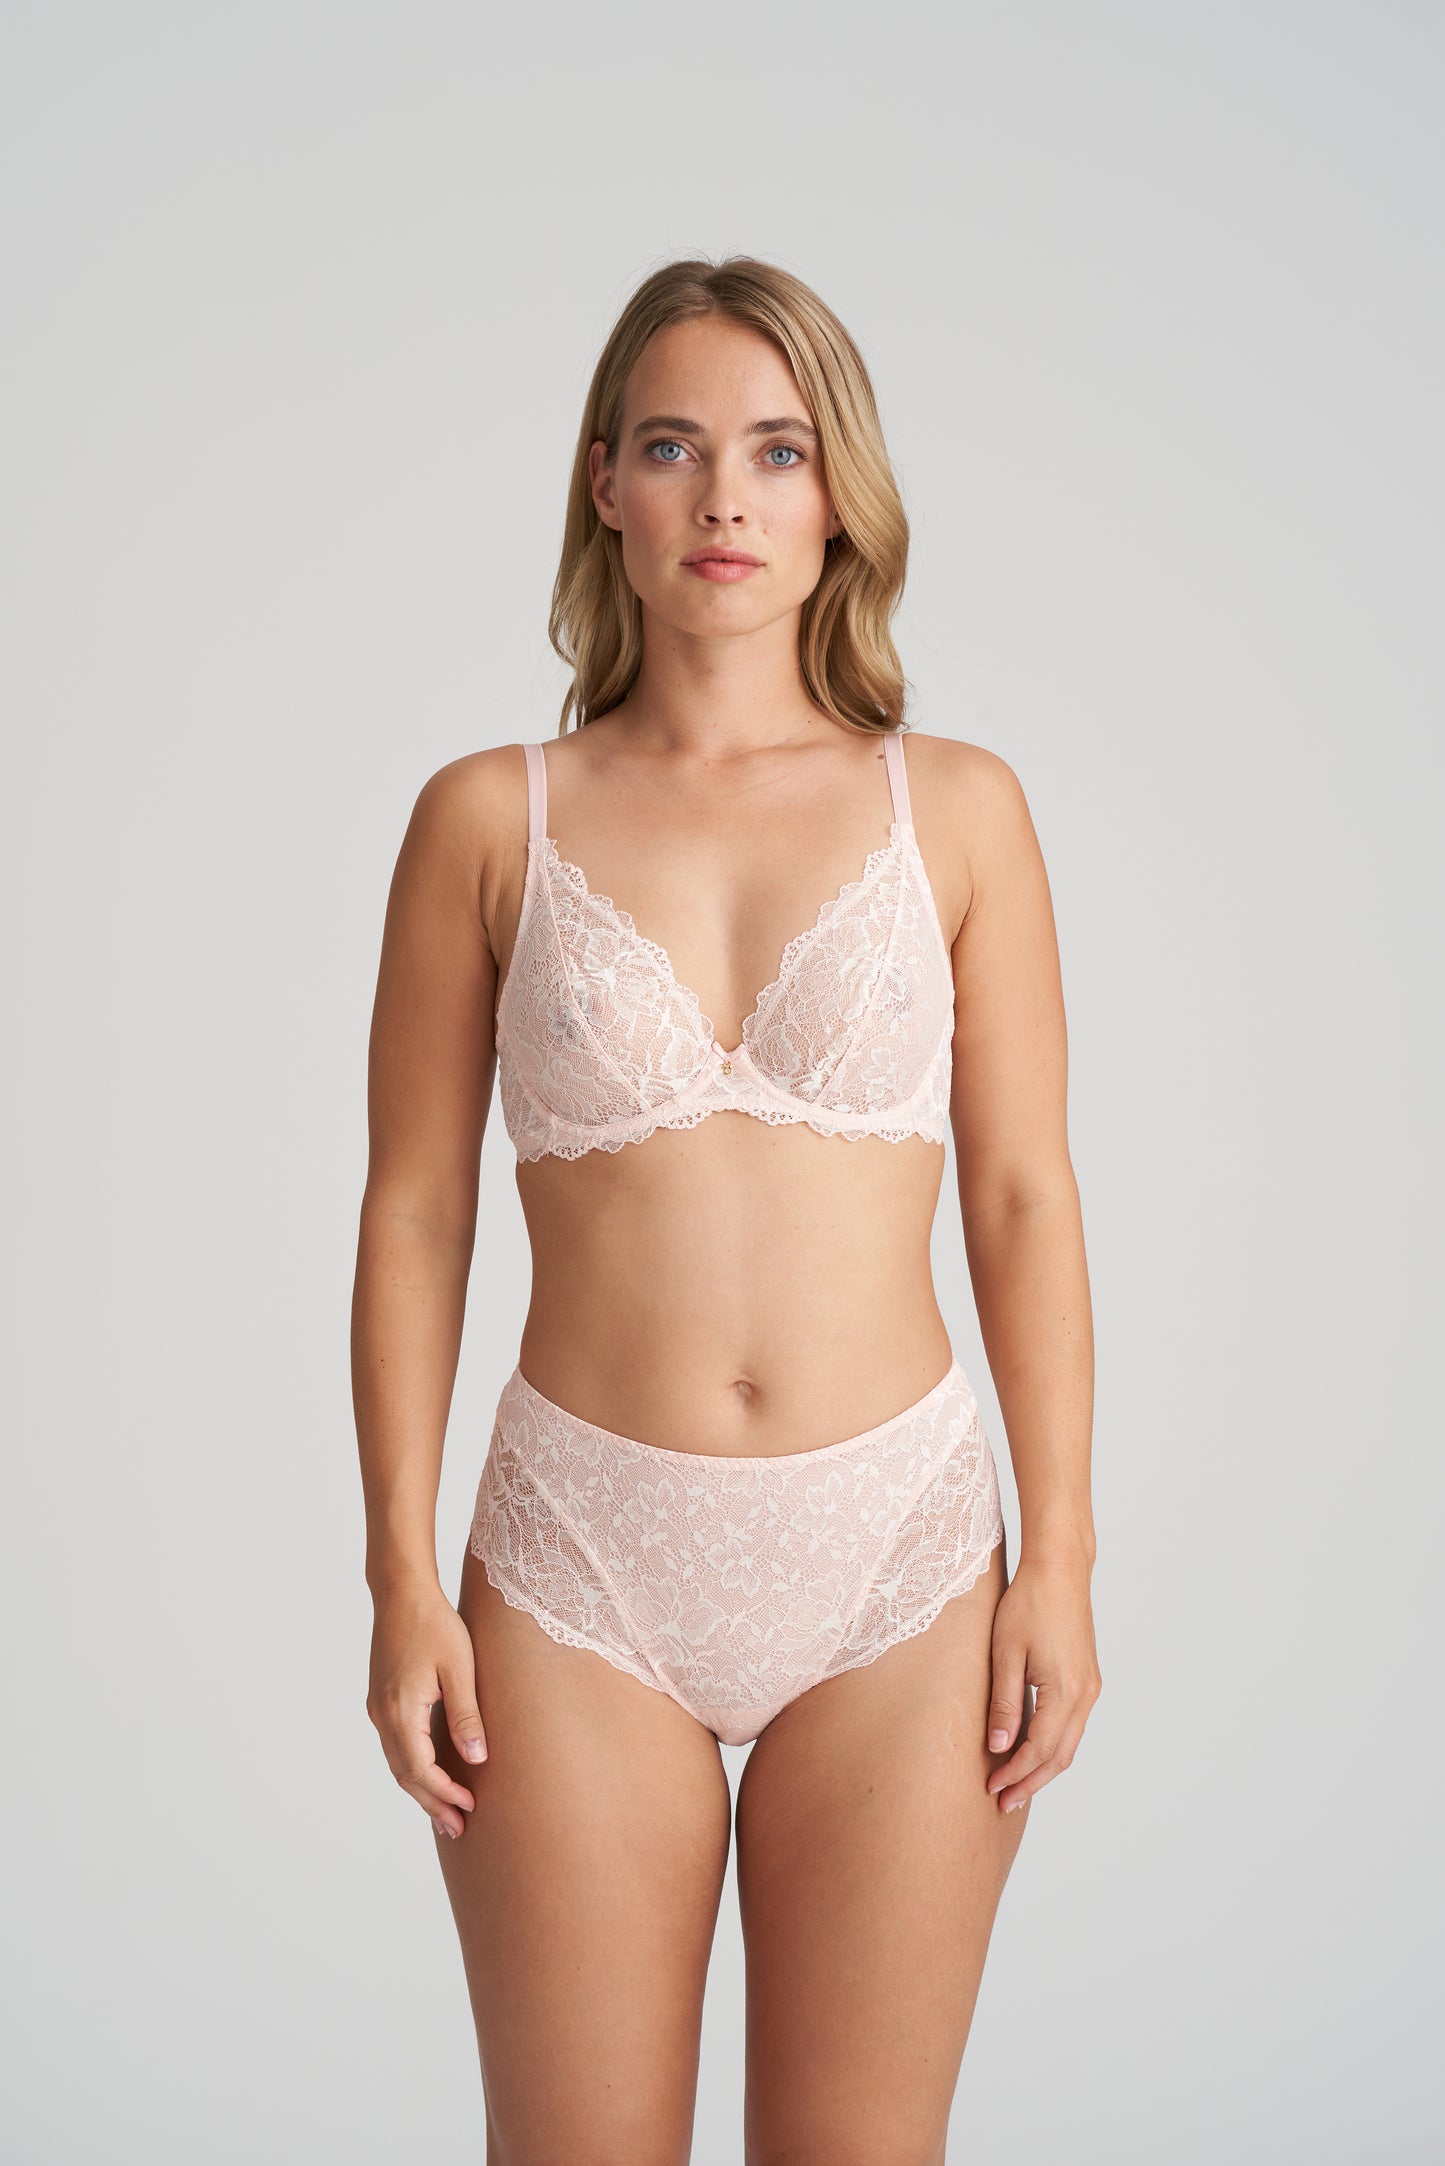 Marie Jo Manyla tailleslip pearly pink